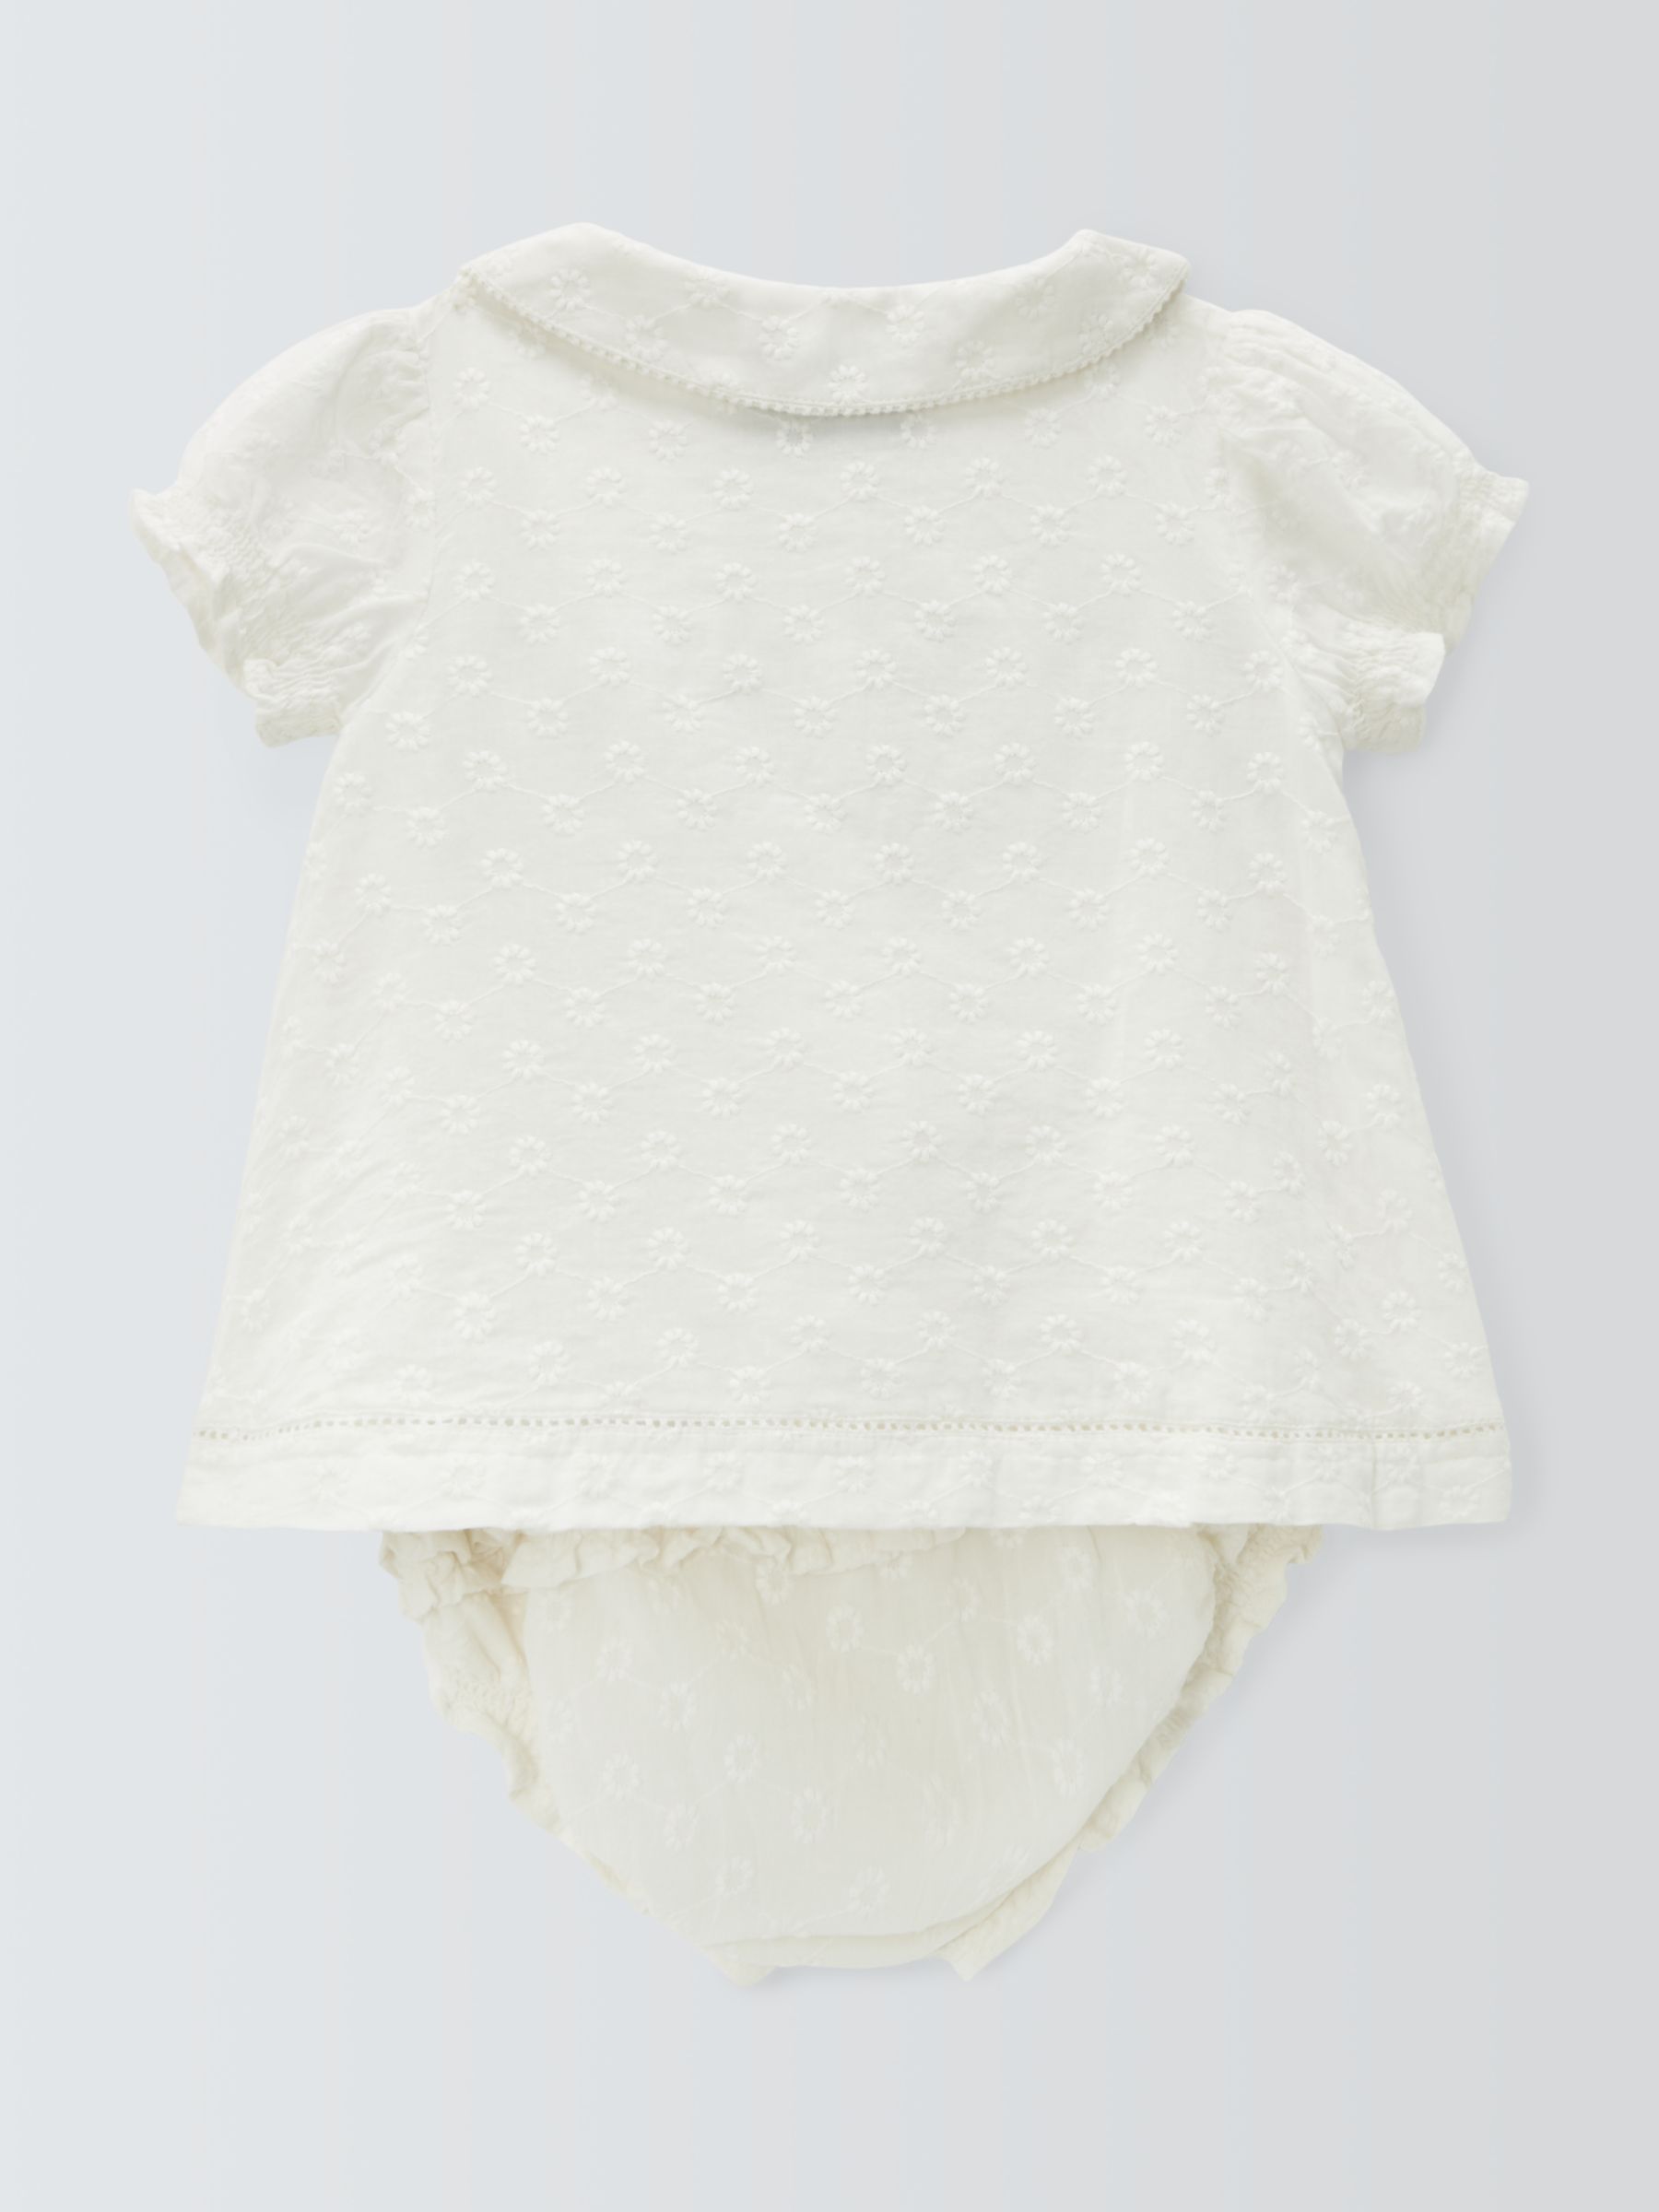 John Lewis Heirloom Collection Baby Cotton Embroidered Dress and Bloomers Set, Cream, 2-3 years